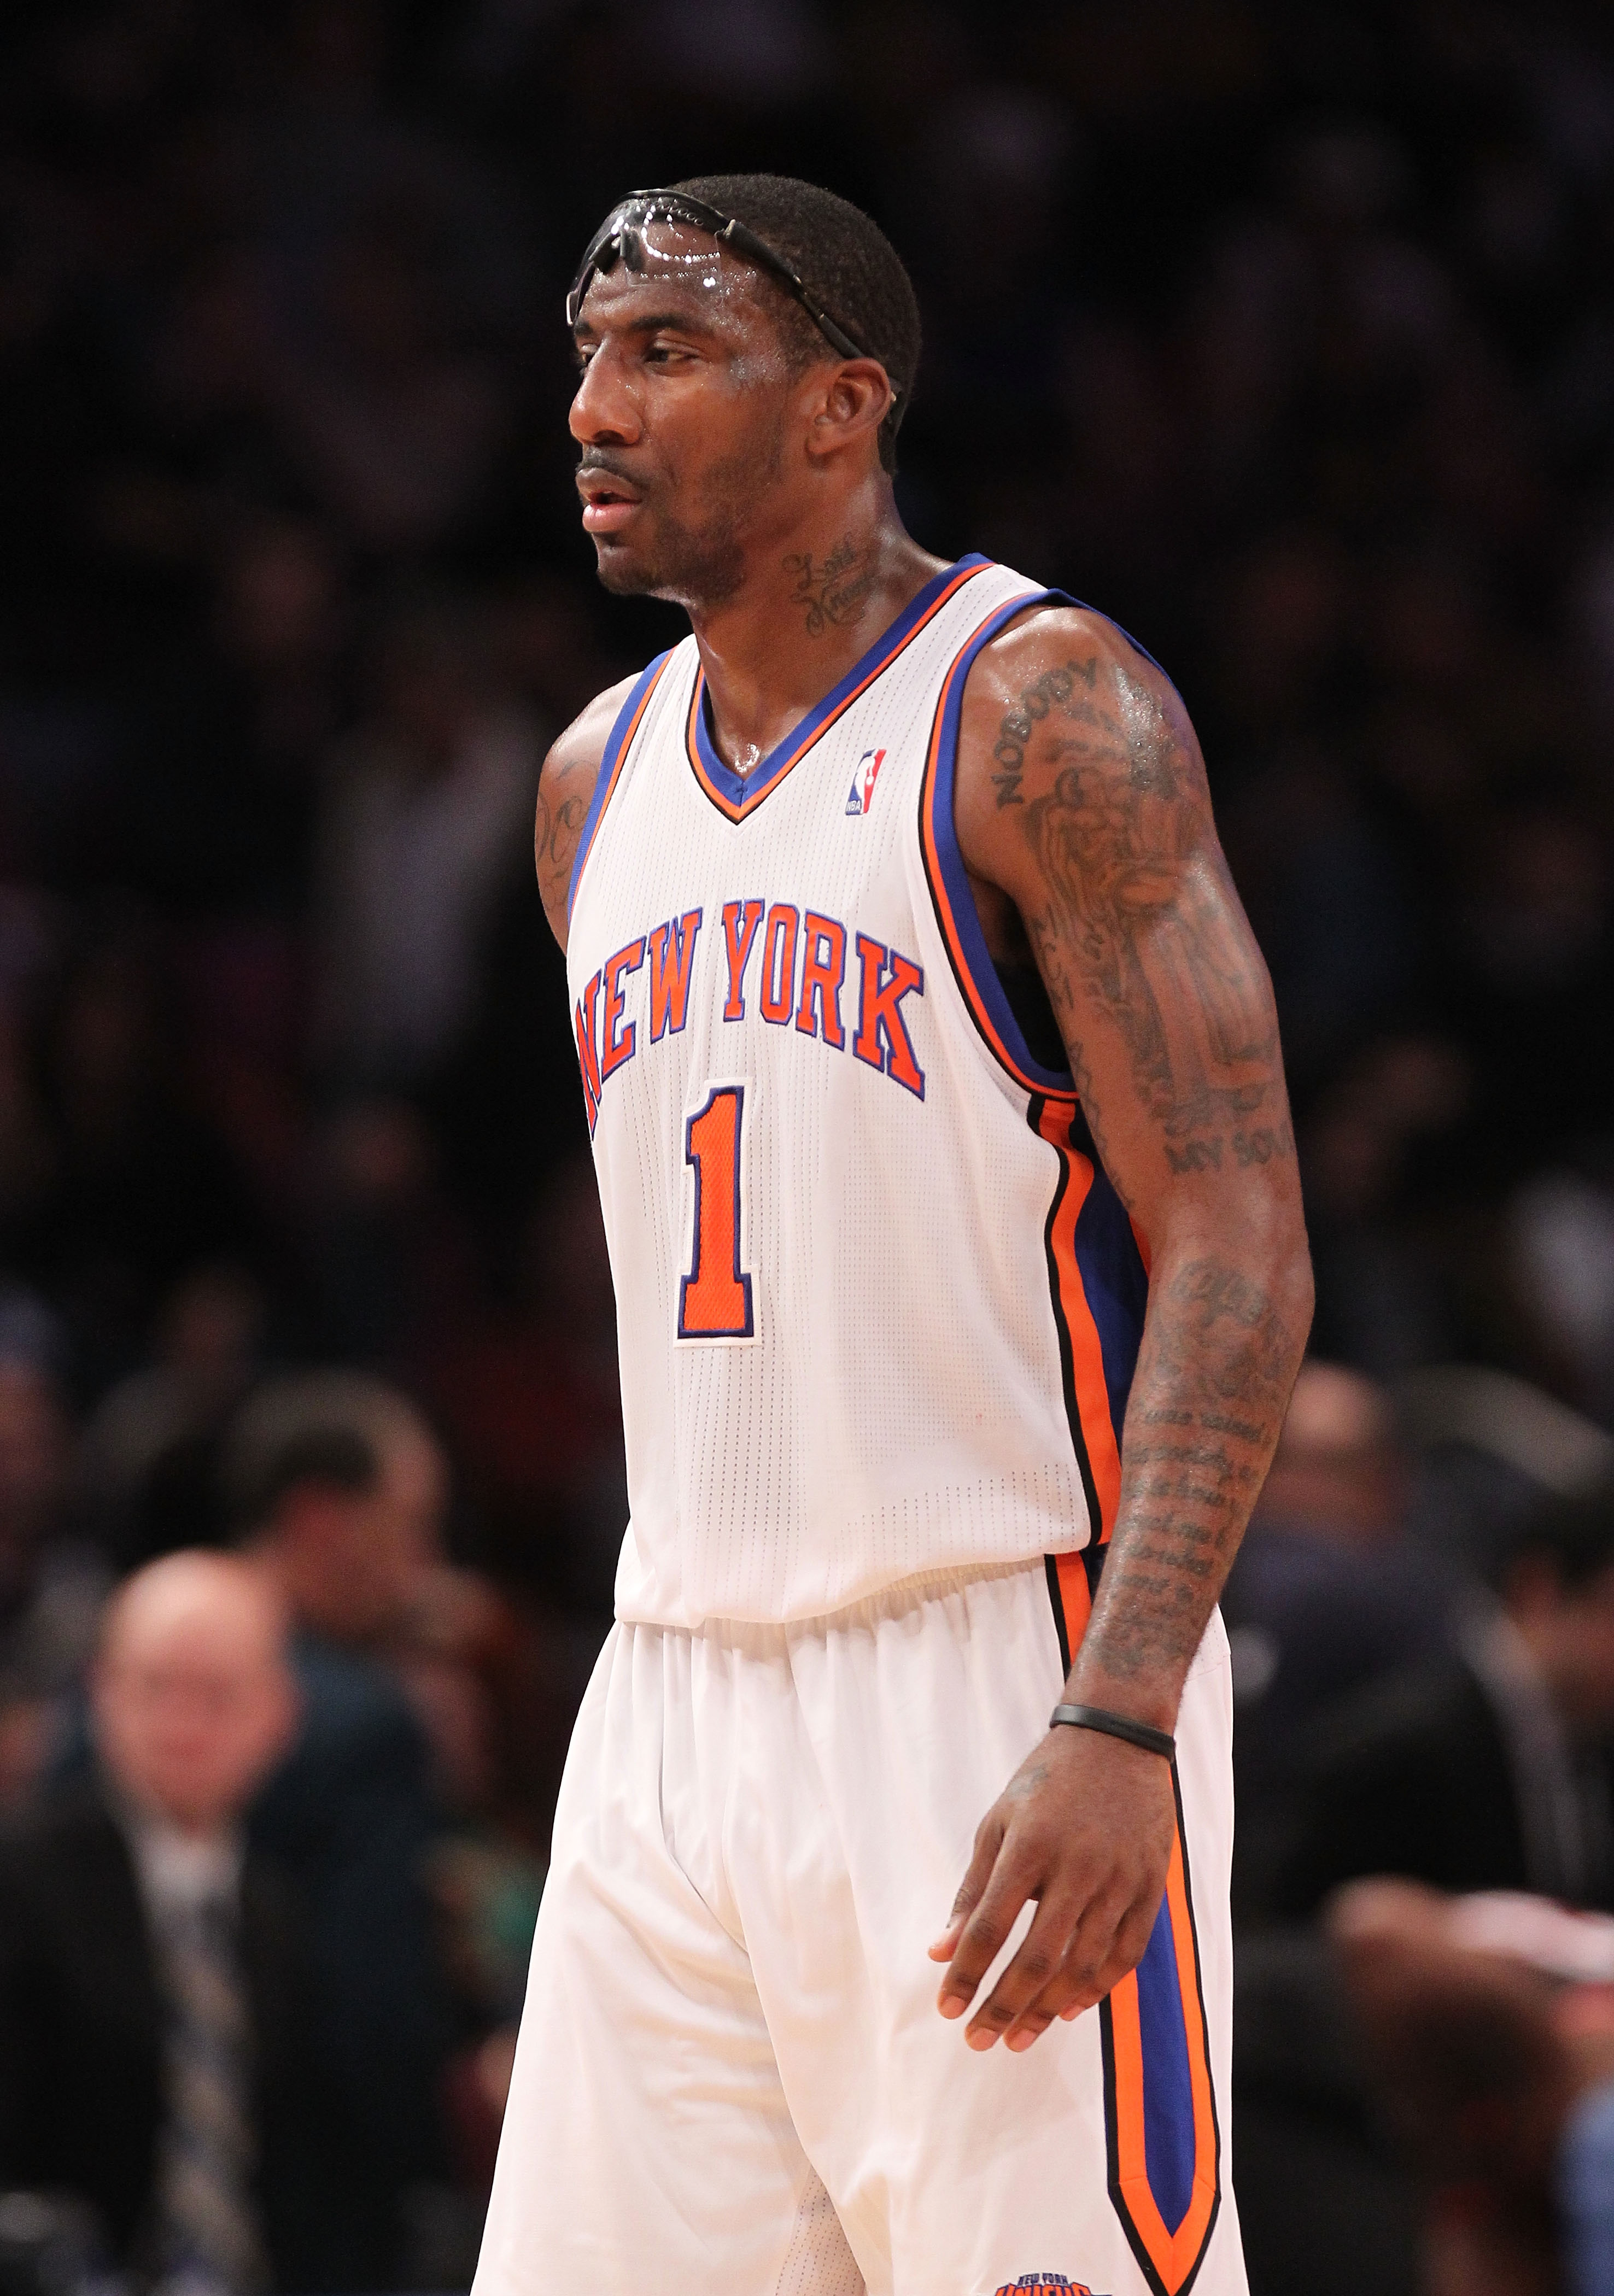 Amare Stoudemire, Amare Stoudemire, New York Knicks. (This …